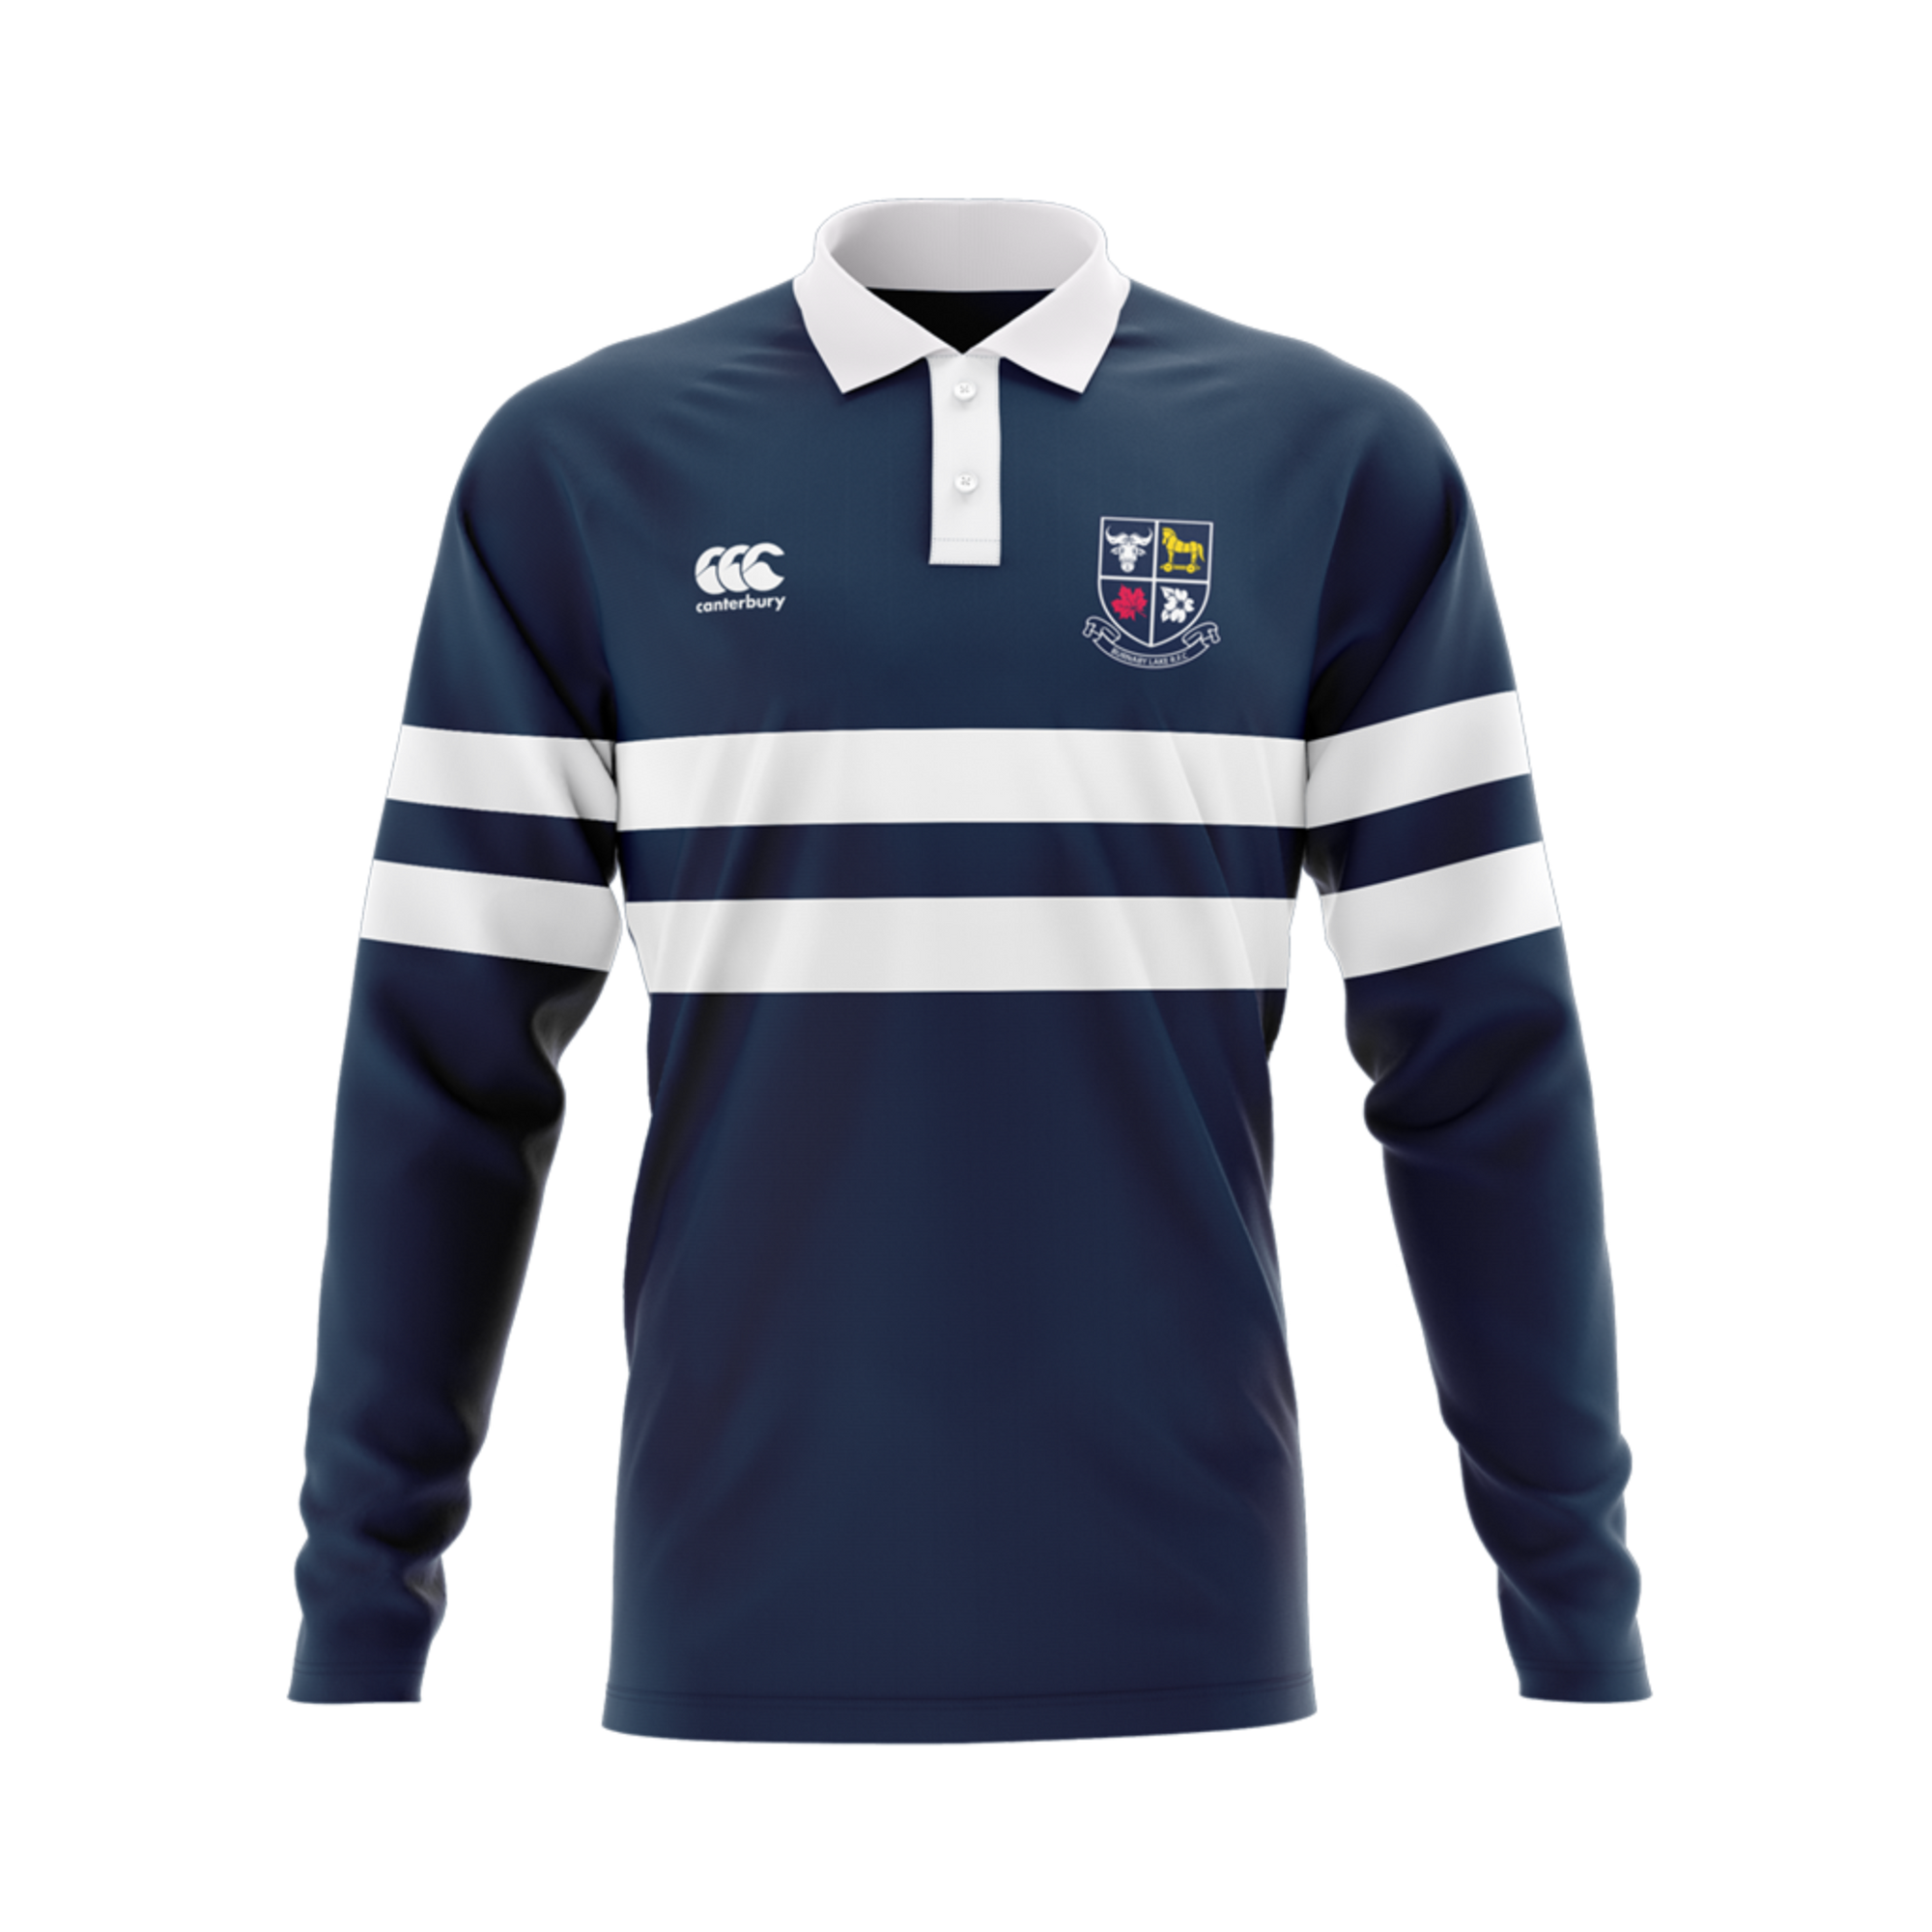 Burnaby Lake Rugby Club Canterbury CCC Classic Cotton Jersey Adult Unisex Sizing S - 4XL Navy/White